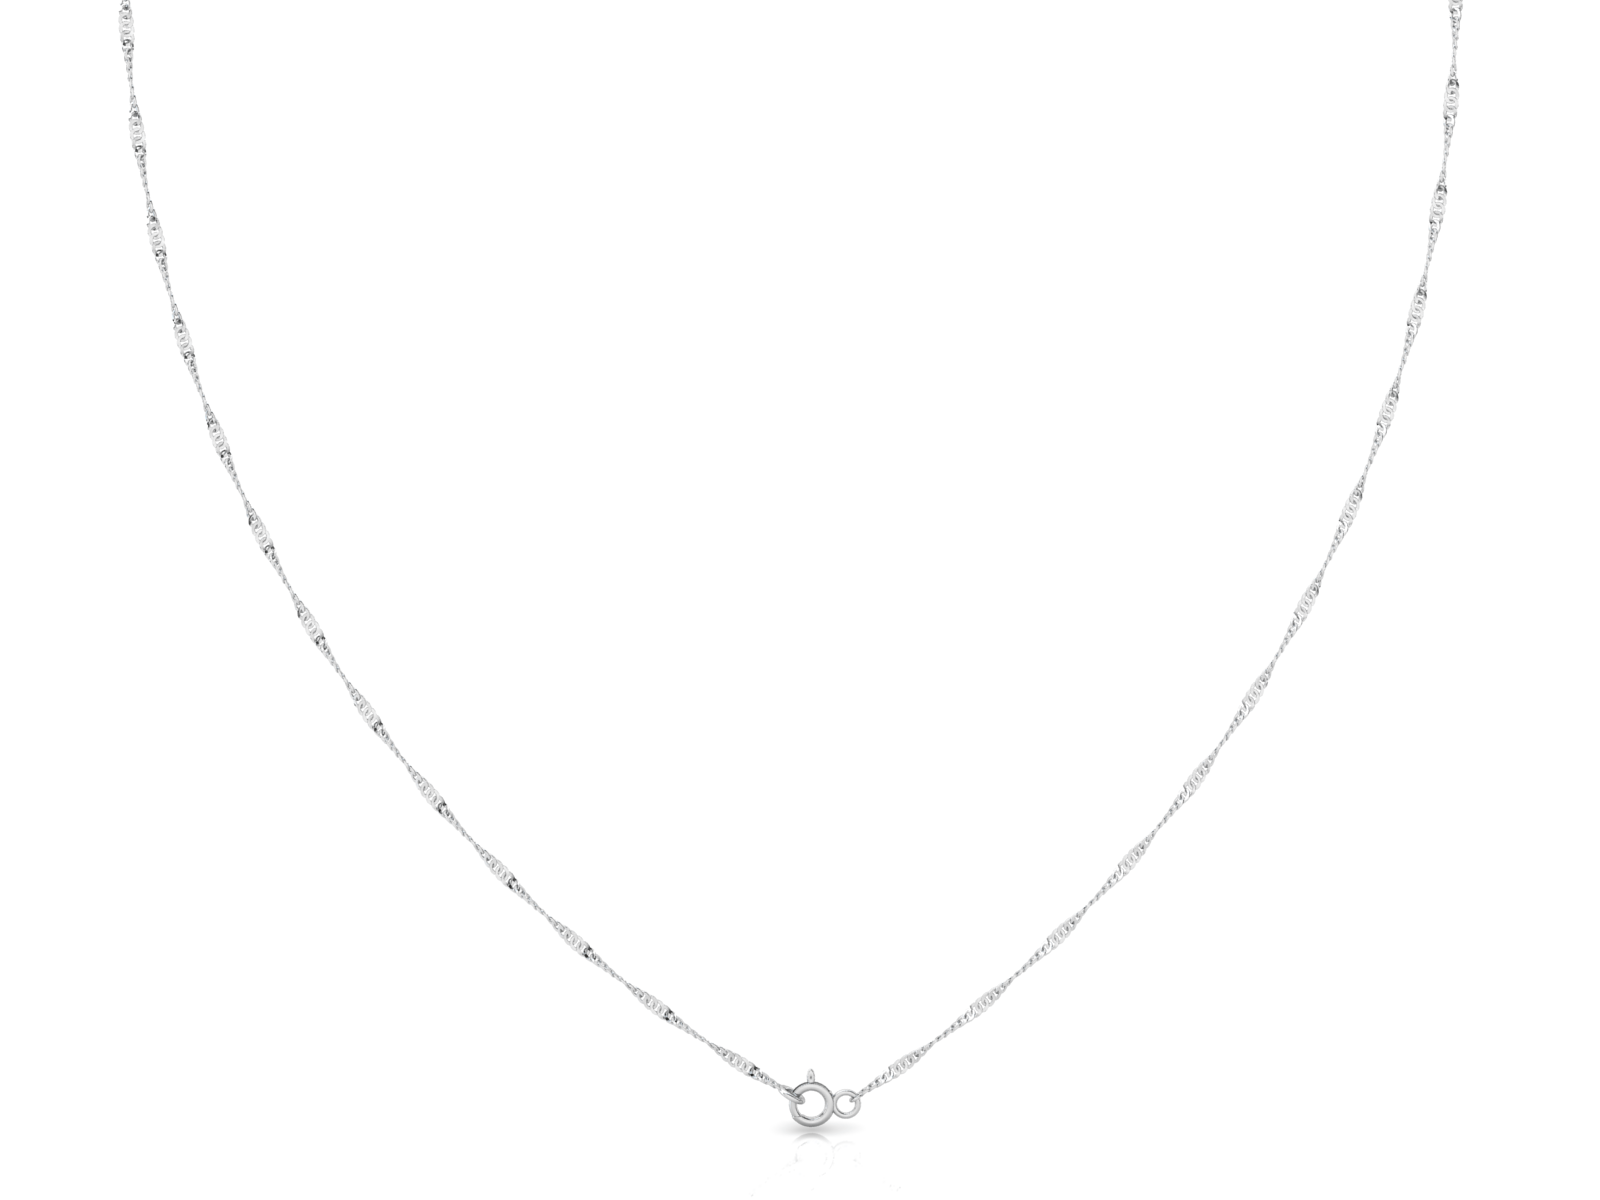 Robe (2mm) Sterling Silver Chain, 18", 20", 24", 30"